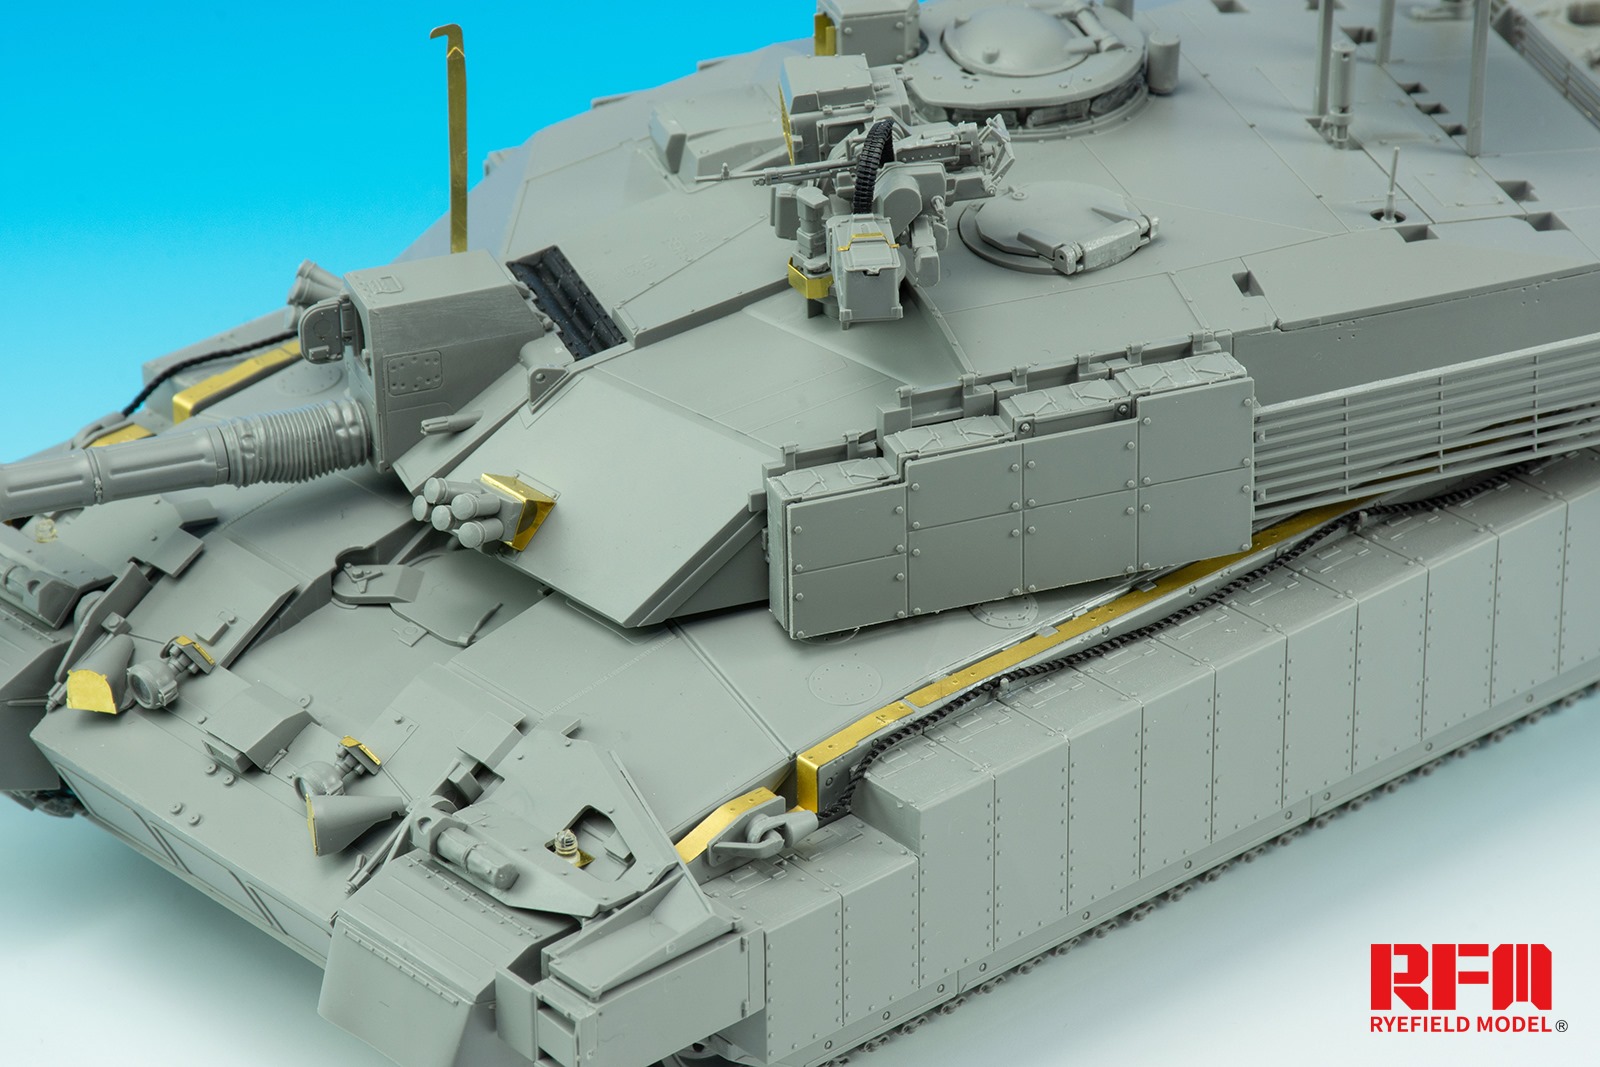 The Modelling News: Preview: Ryefield Model's new 35th Megatron